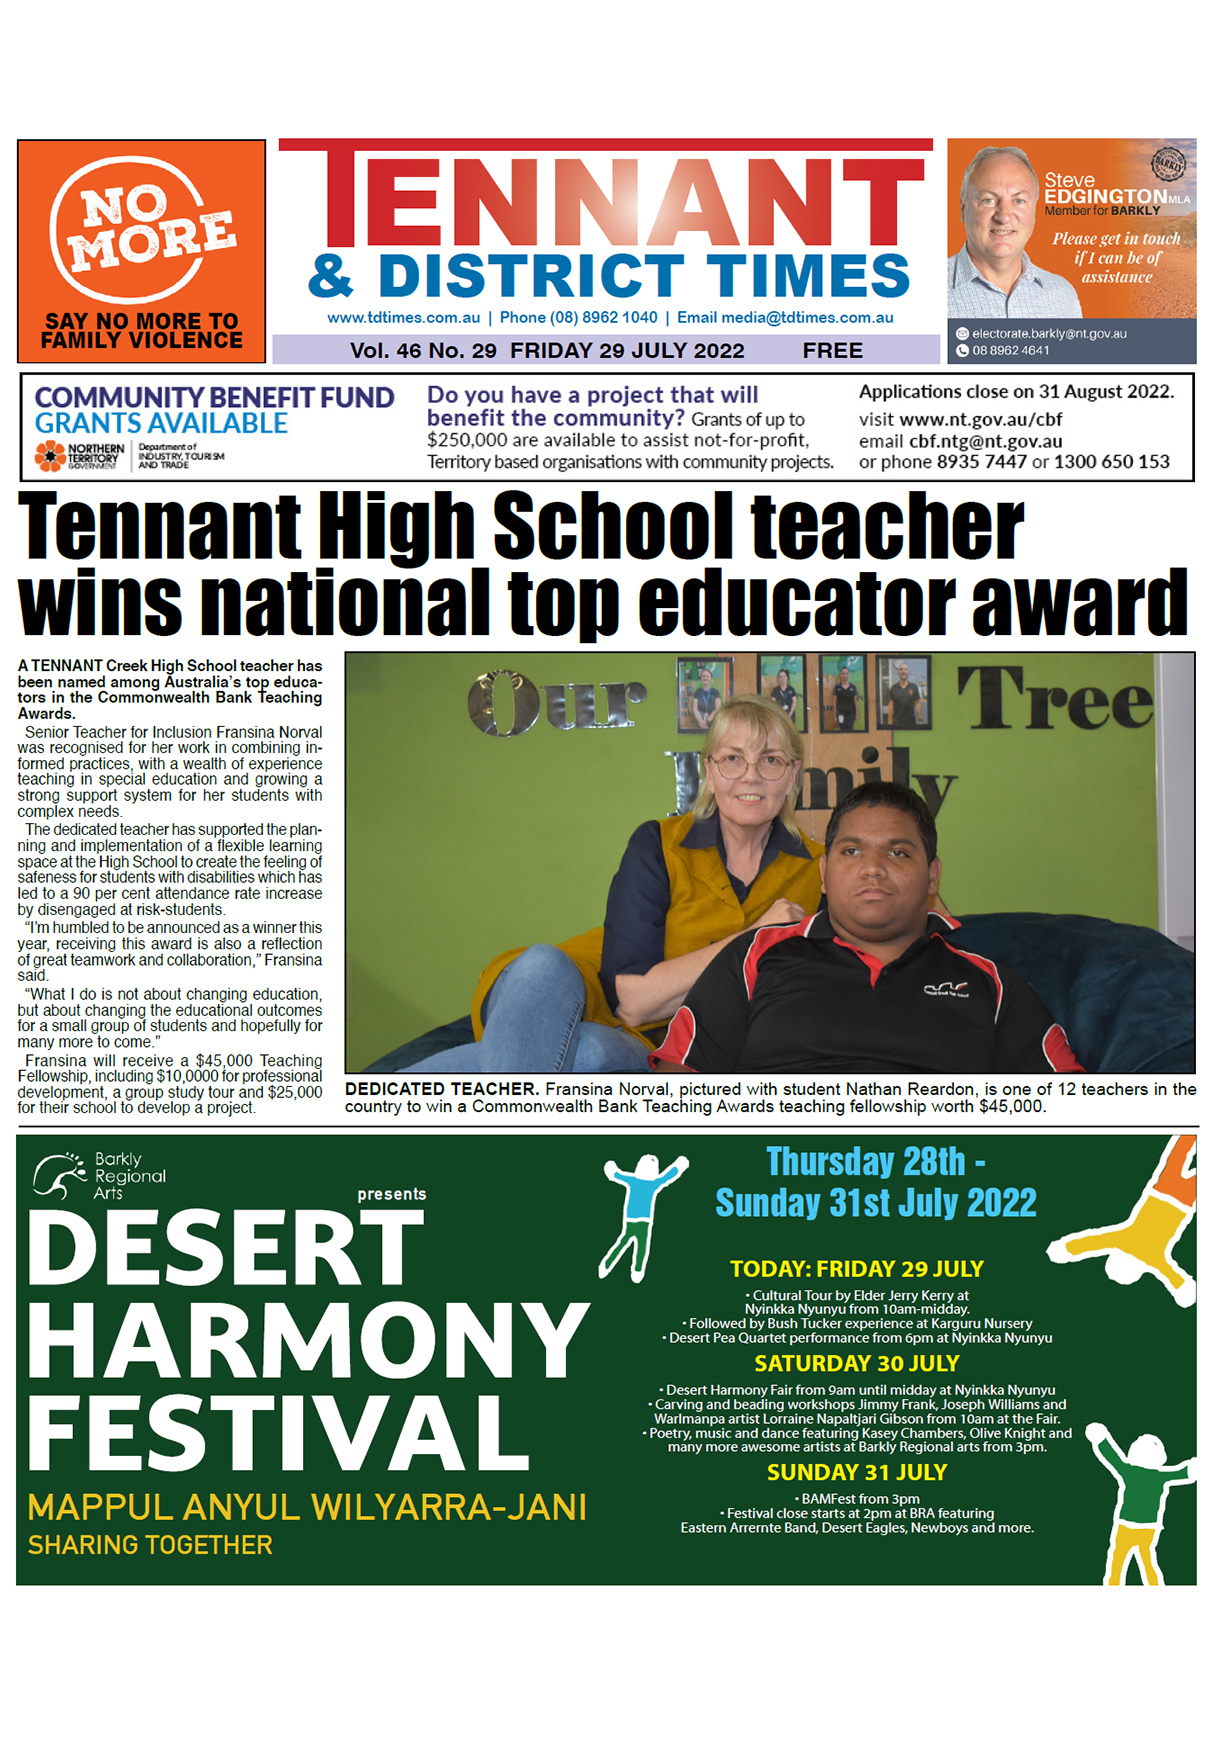 Tennant & District Times 29 July 2022